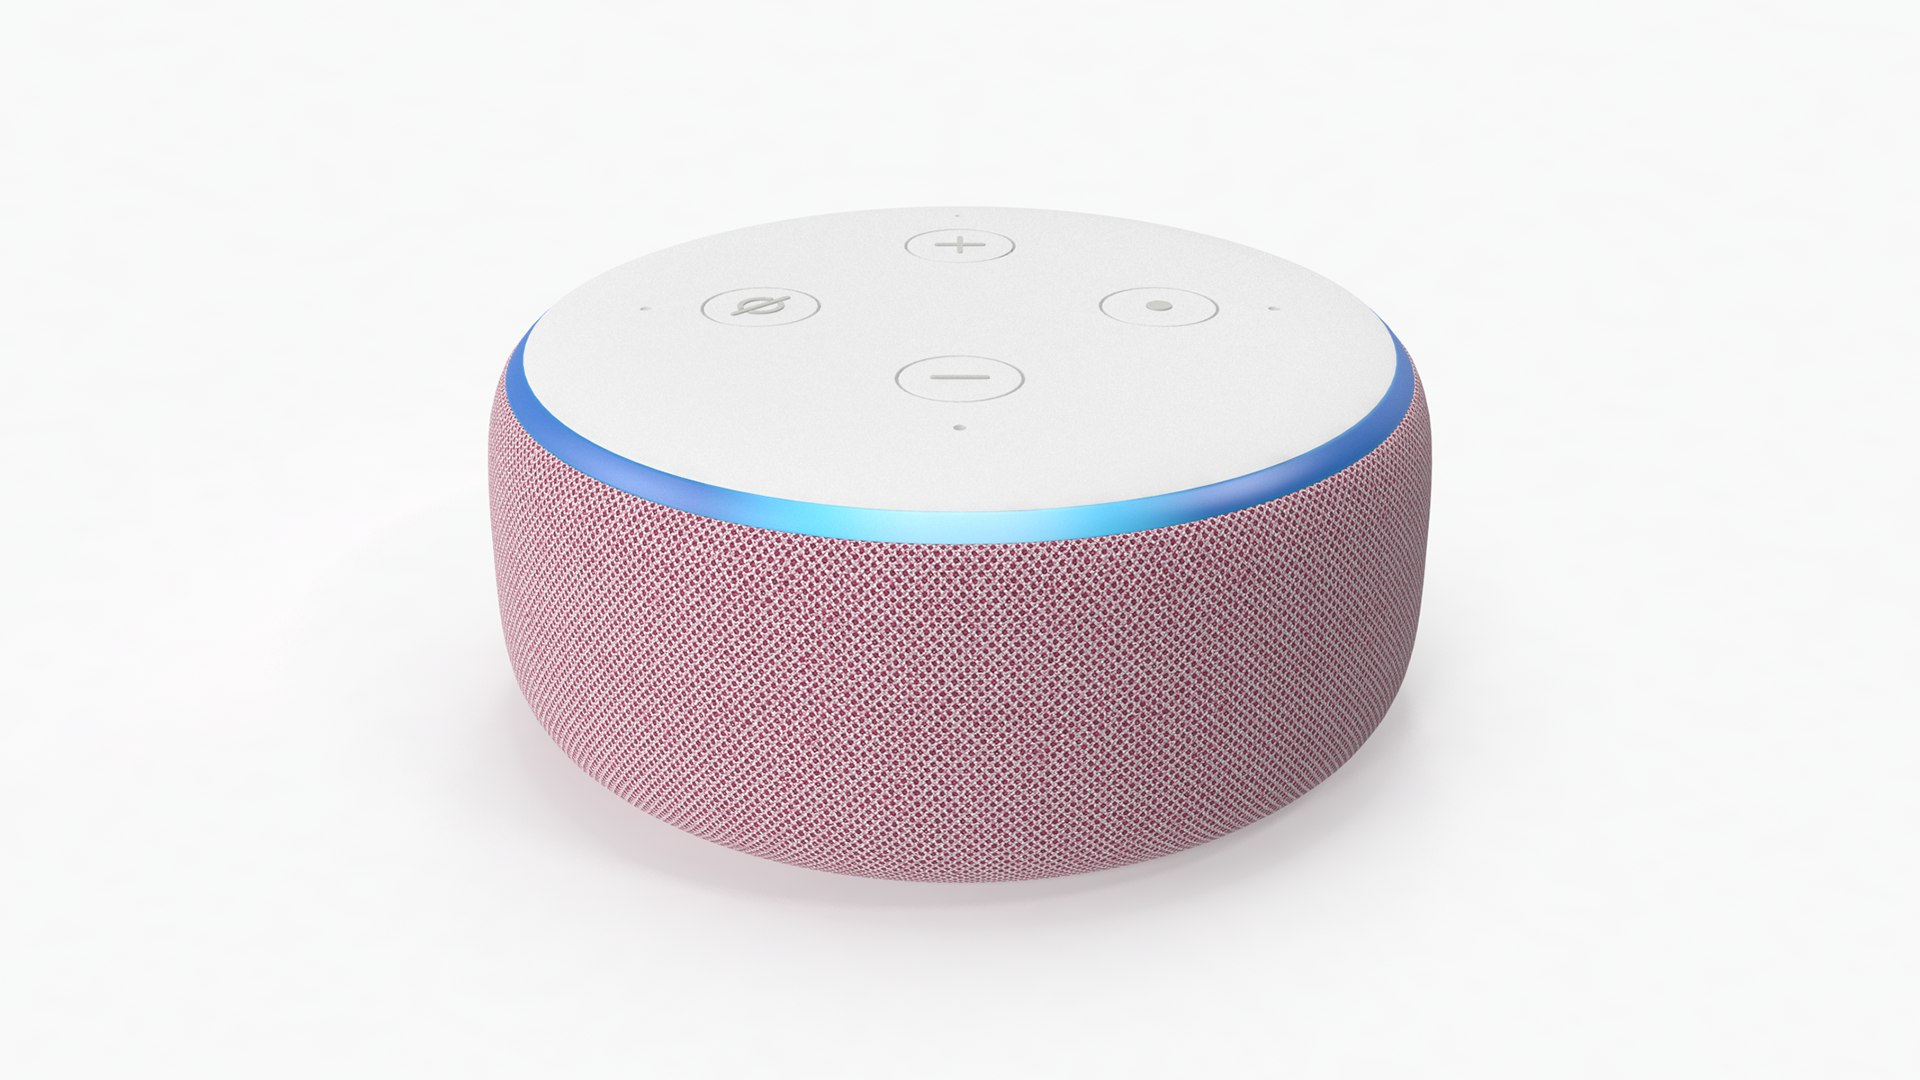 Wireless Link: Connecting Echo Dot To IPhone Via Bluetooth